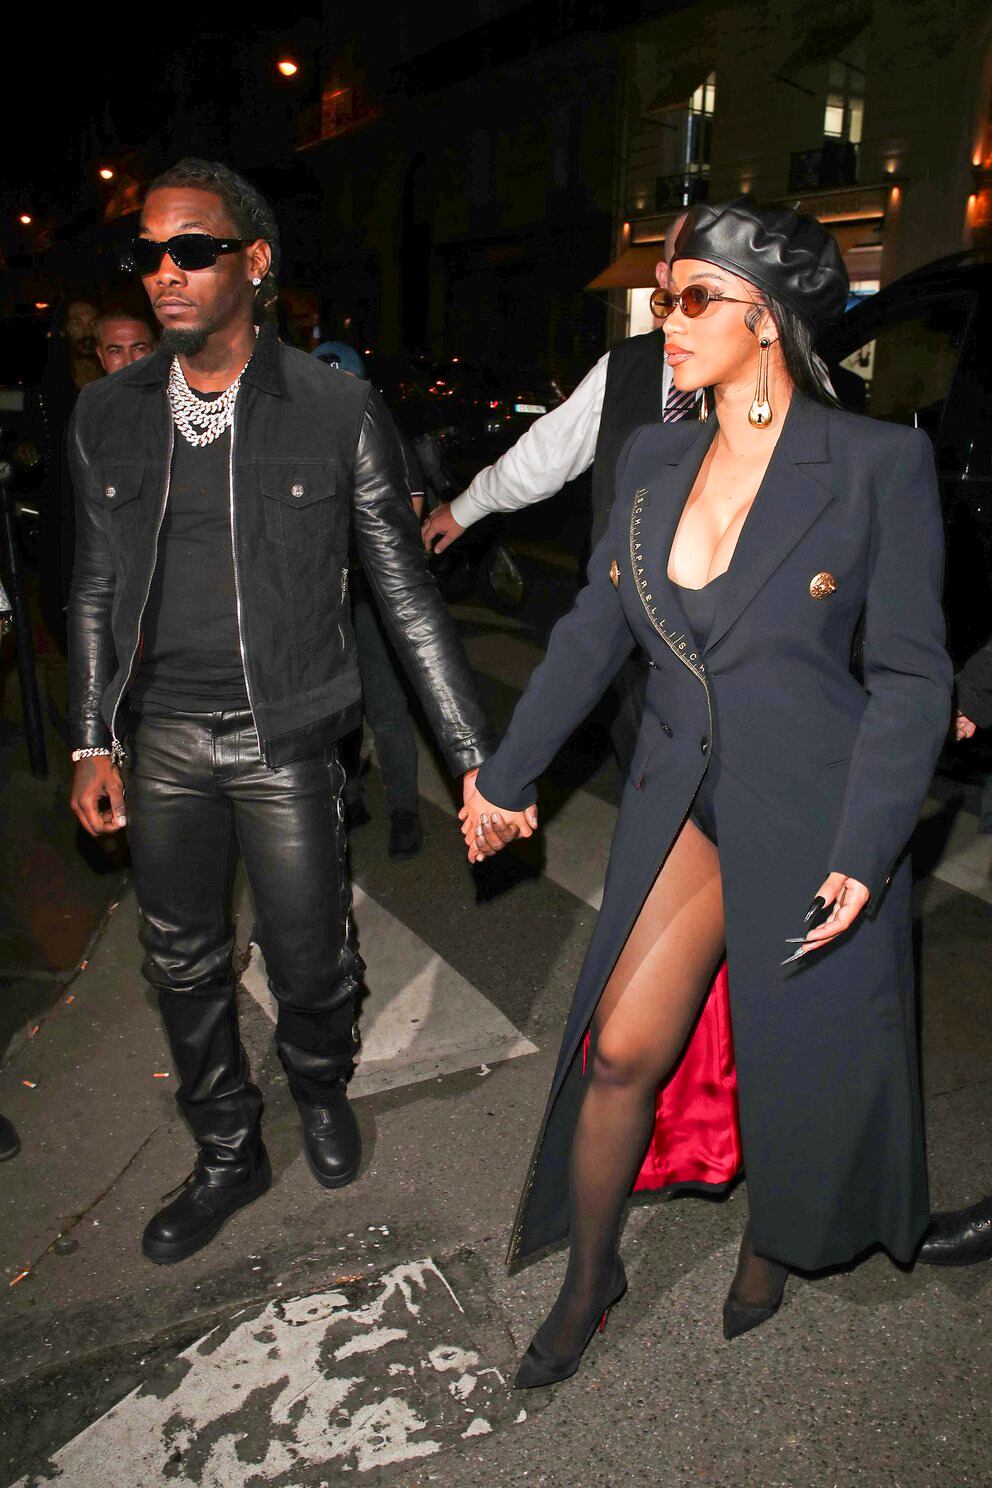 Cardi B and Offset’s romantic night in Paris, Diane Kruger’s walk with her daughter in New York: celebrities in one click